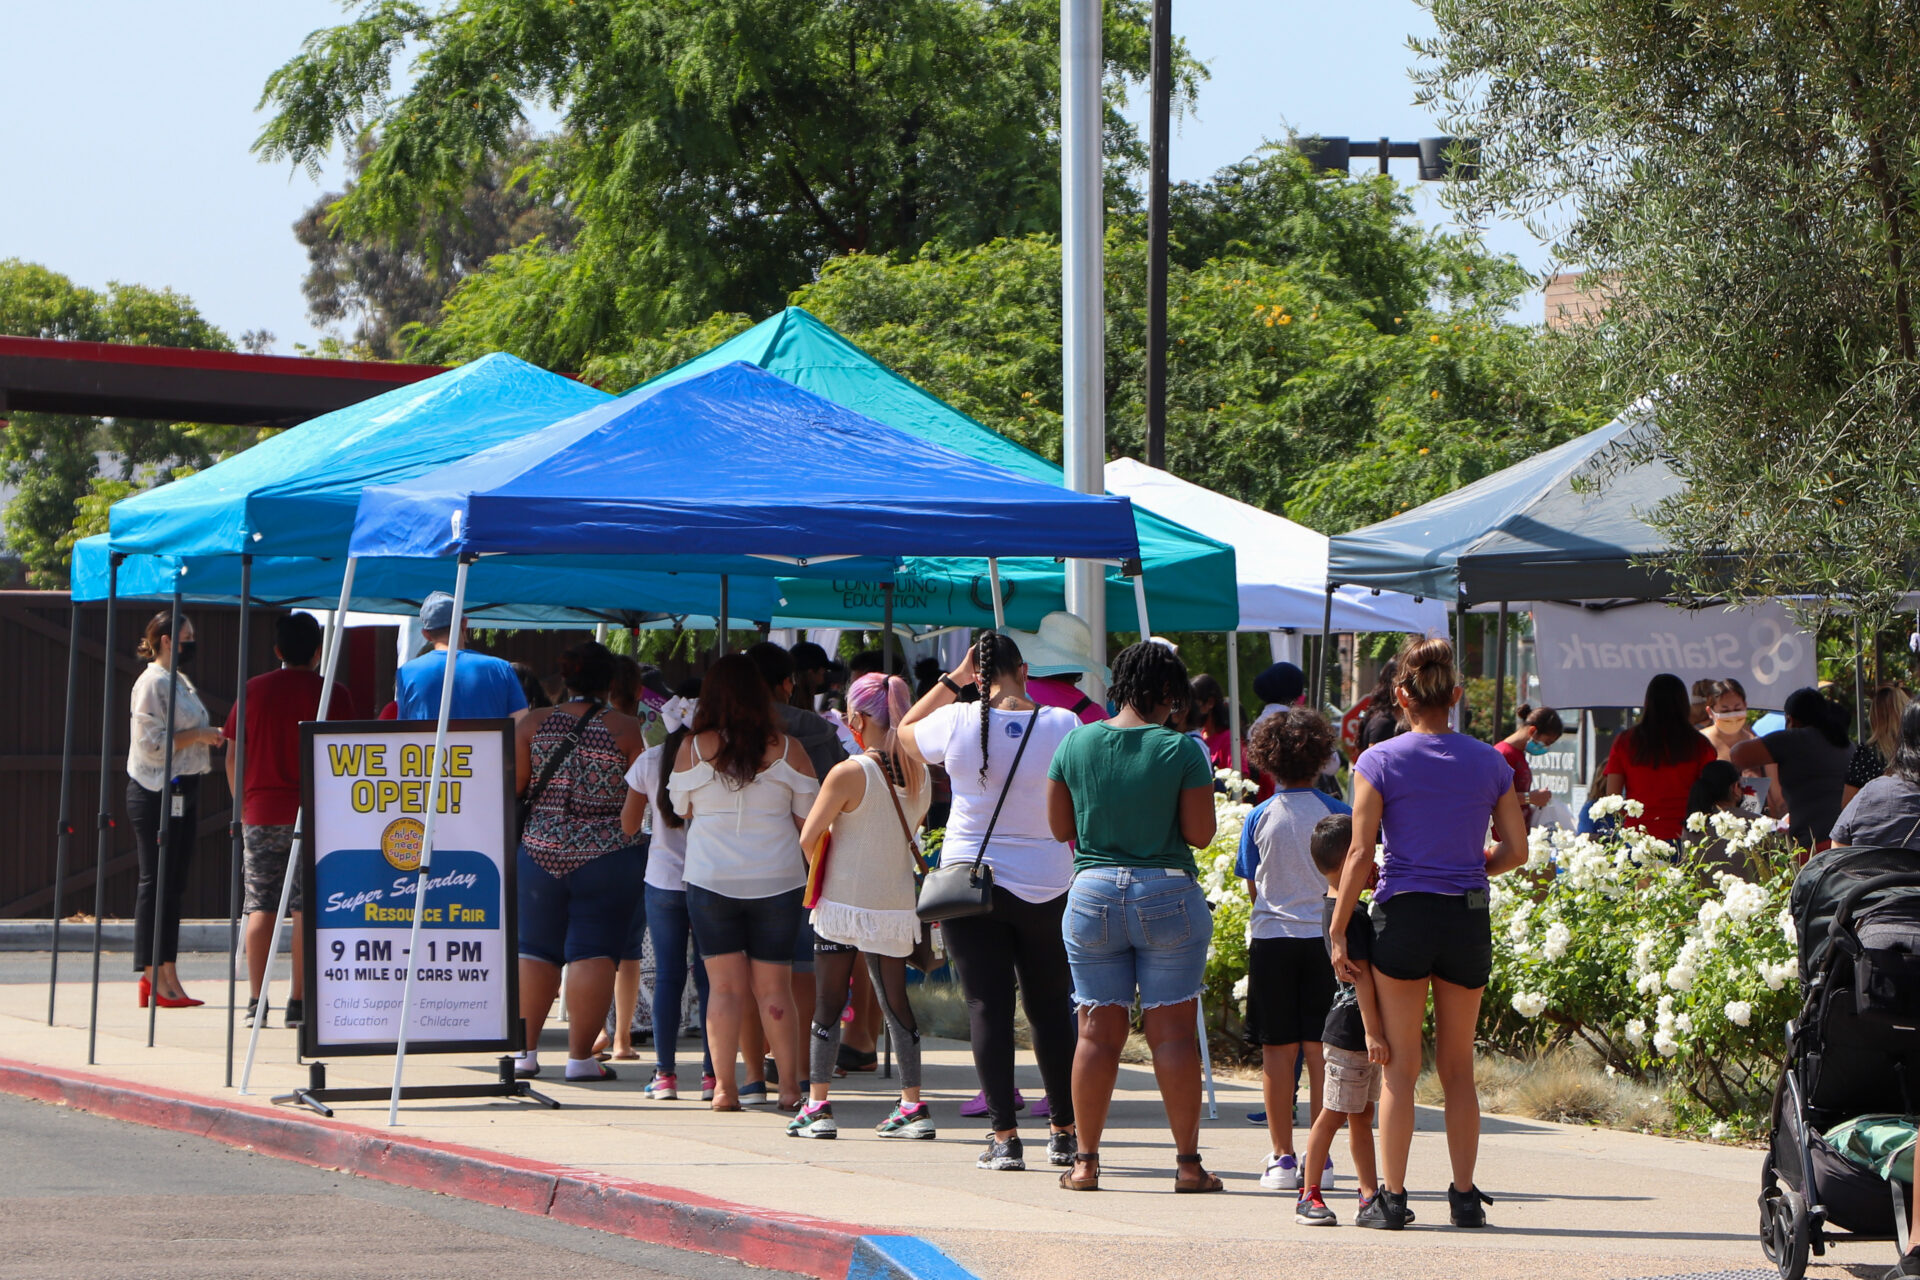 People waiting outside blue pop up tents for child support services at San Diego County Department of Child Support Services Super Saturdays event